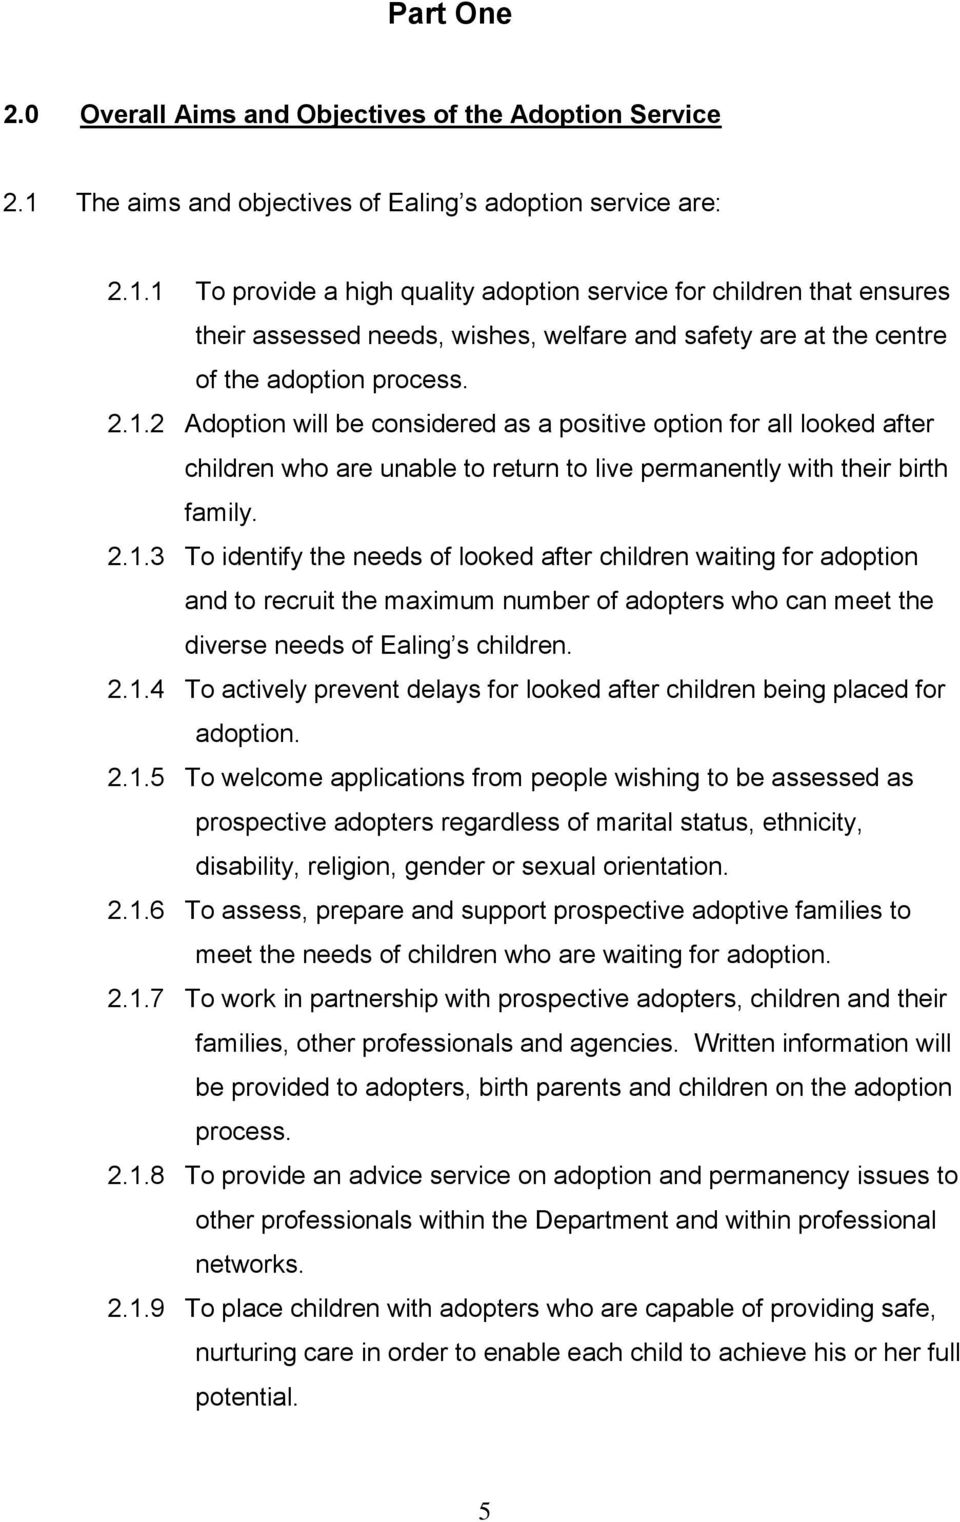 1 To provide a high quality adoption service for children that ensures their assessed needs, wishes, welfare and safety are at the centre of the adoption process. 2.1.2 Adoption will be considered as a positive option for all looked after children who are unable to return to live permanently with their birth family.